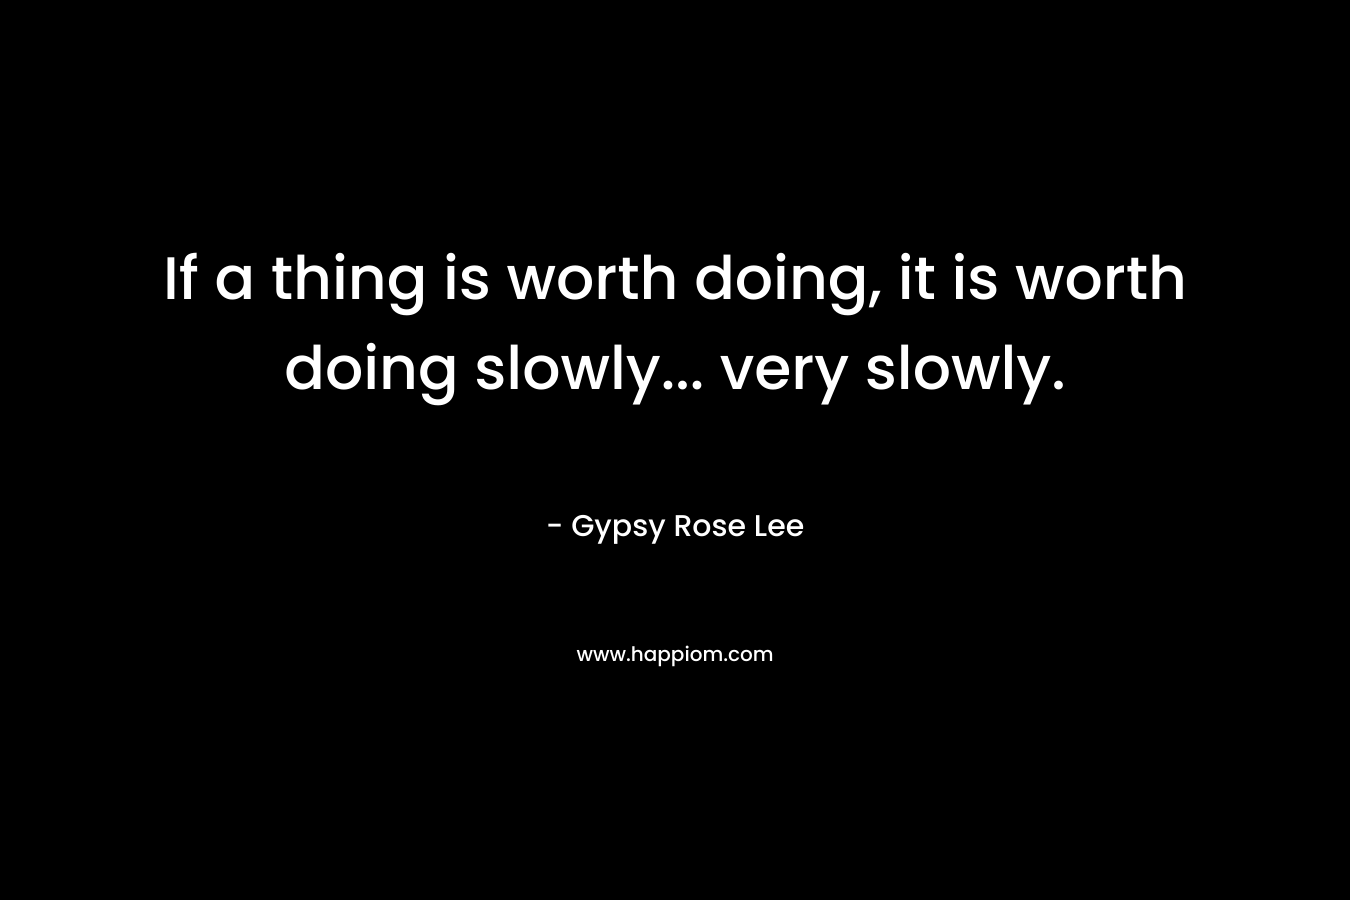 If a thing is worth doing, it is worth doing slowly... very slowly.